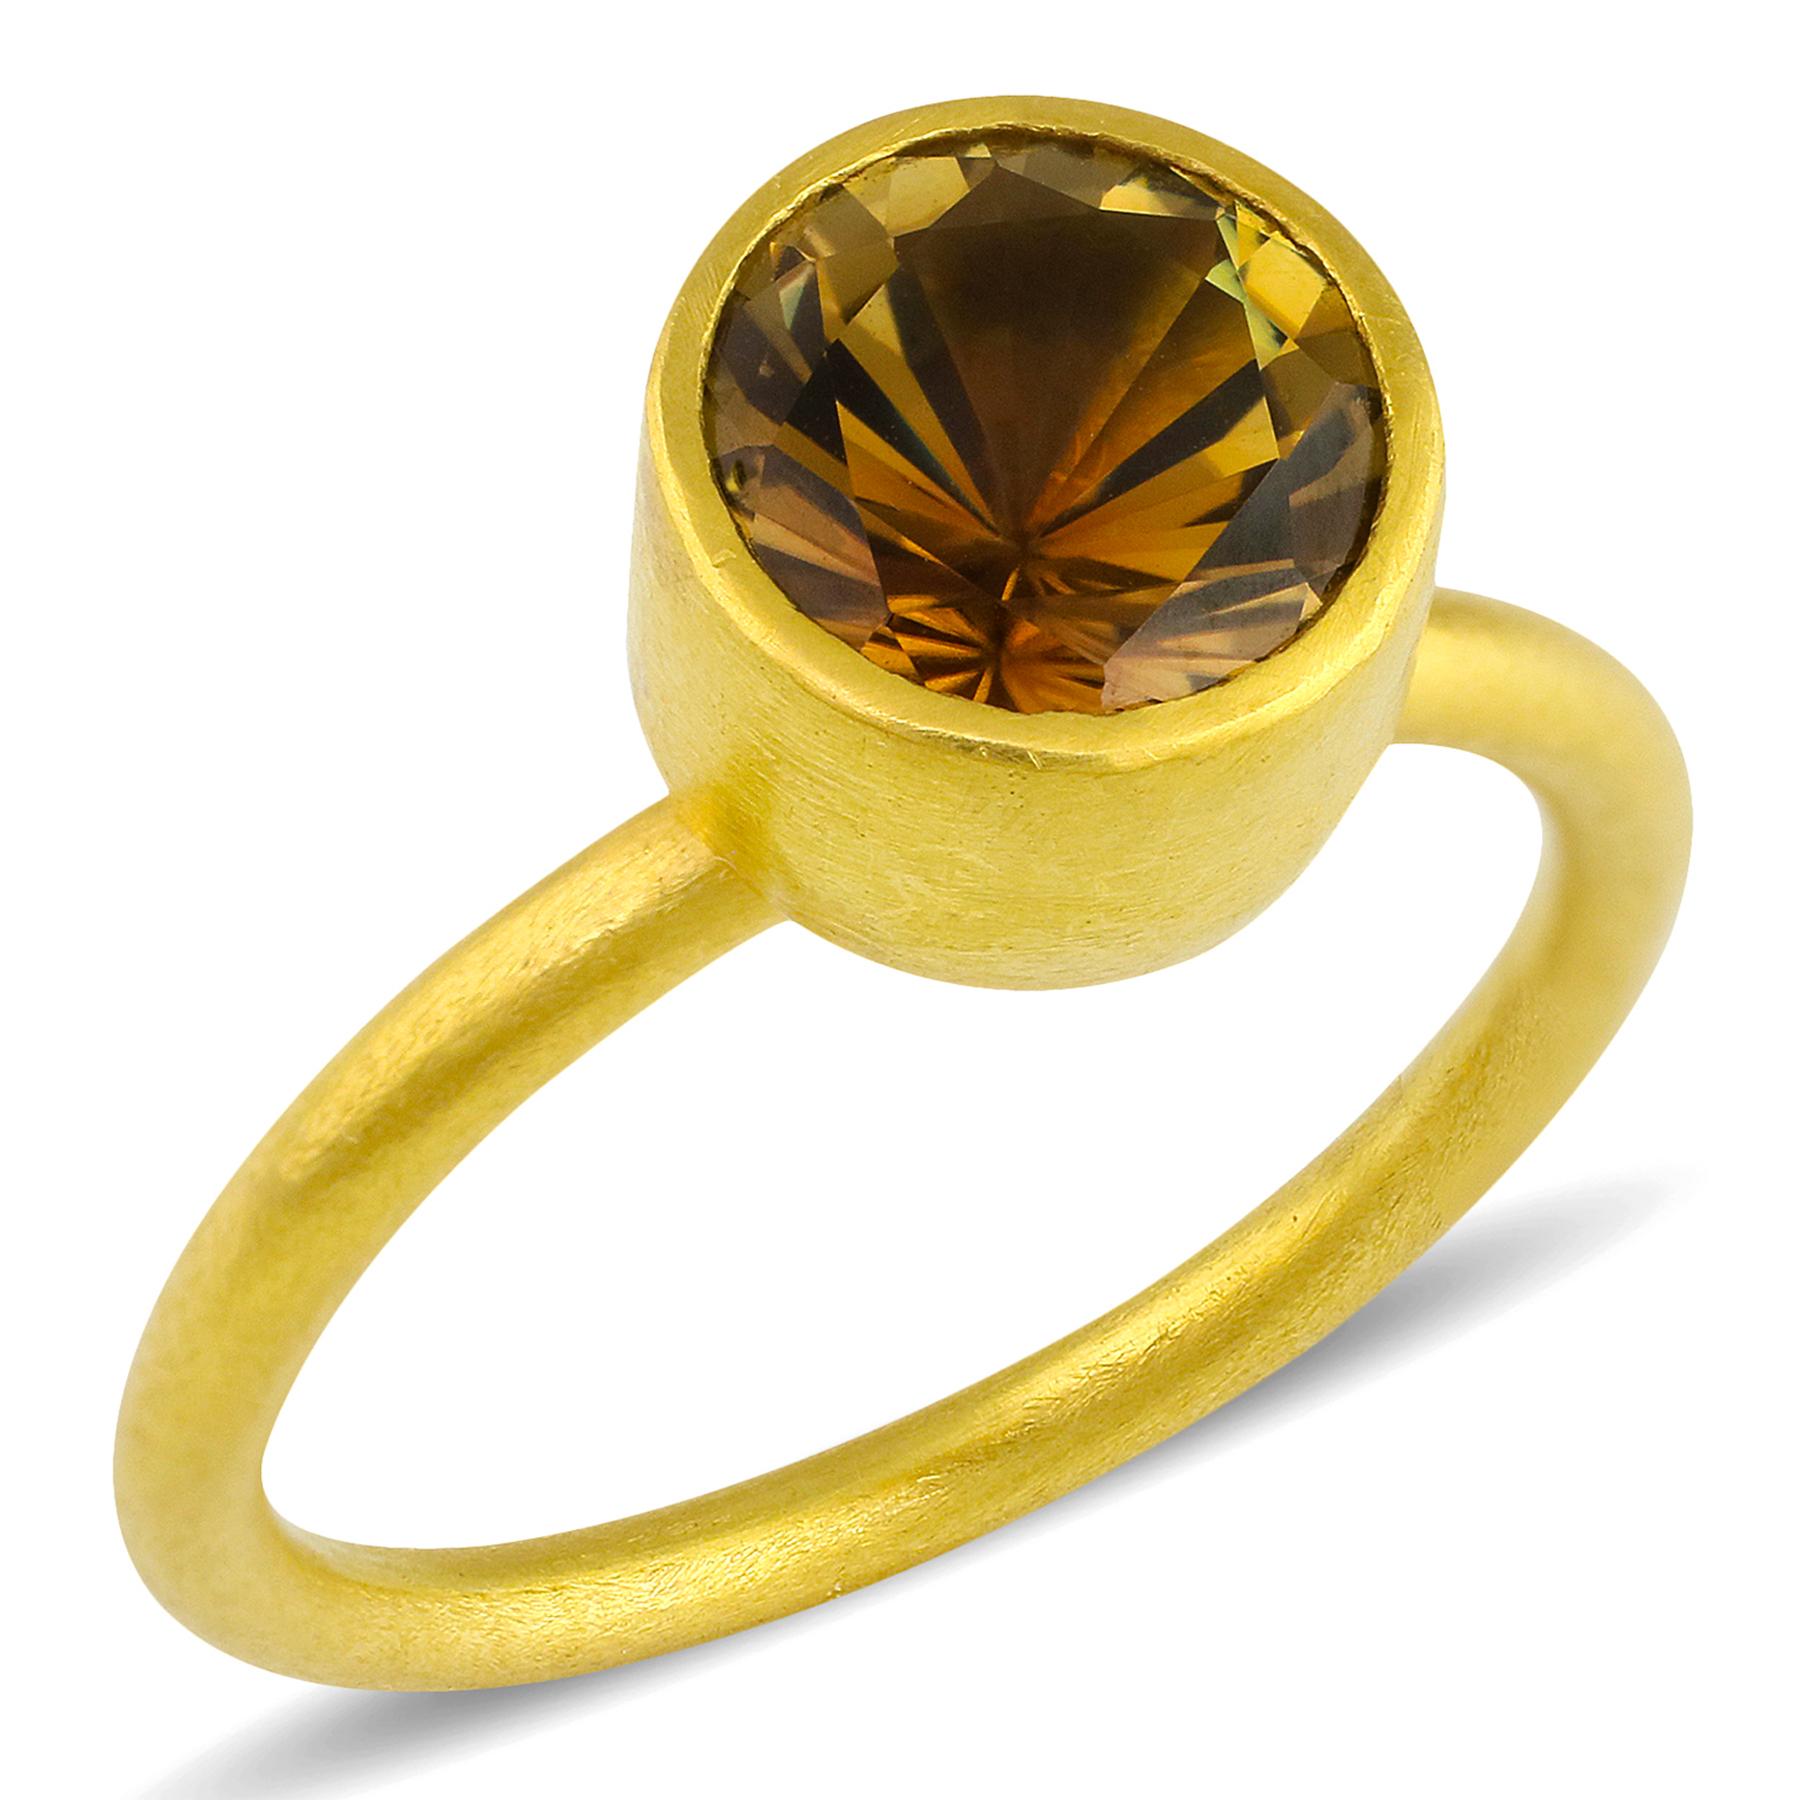 PHILIPPE-SPENCER -   1.85 ct Olive Bi-Color Tourmaline wrapped in 22K Gold Bezel with Solid Round 20K Gold Ring. Brushed Matte Finish. Size 7, and is in-stock and ready to ship. Our apologies in advance, this One-Of-A-Kind Solitaire is not